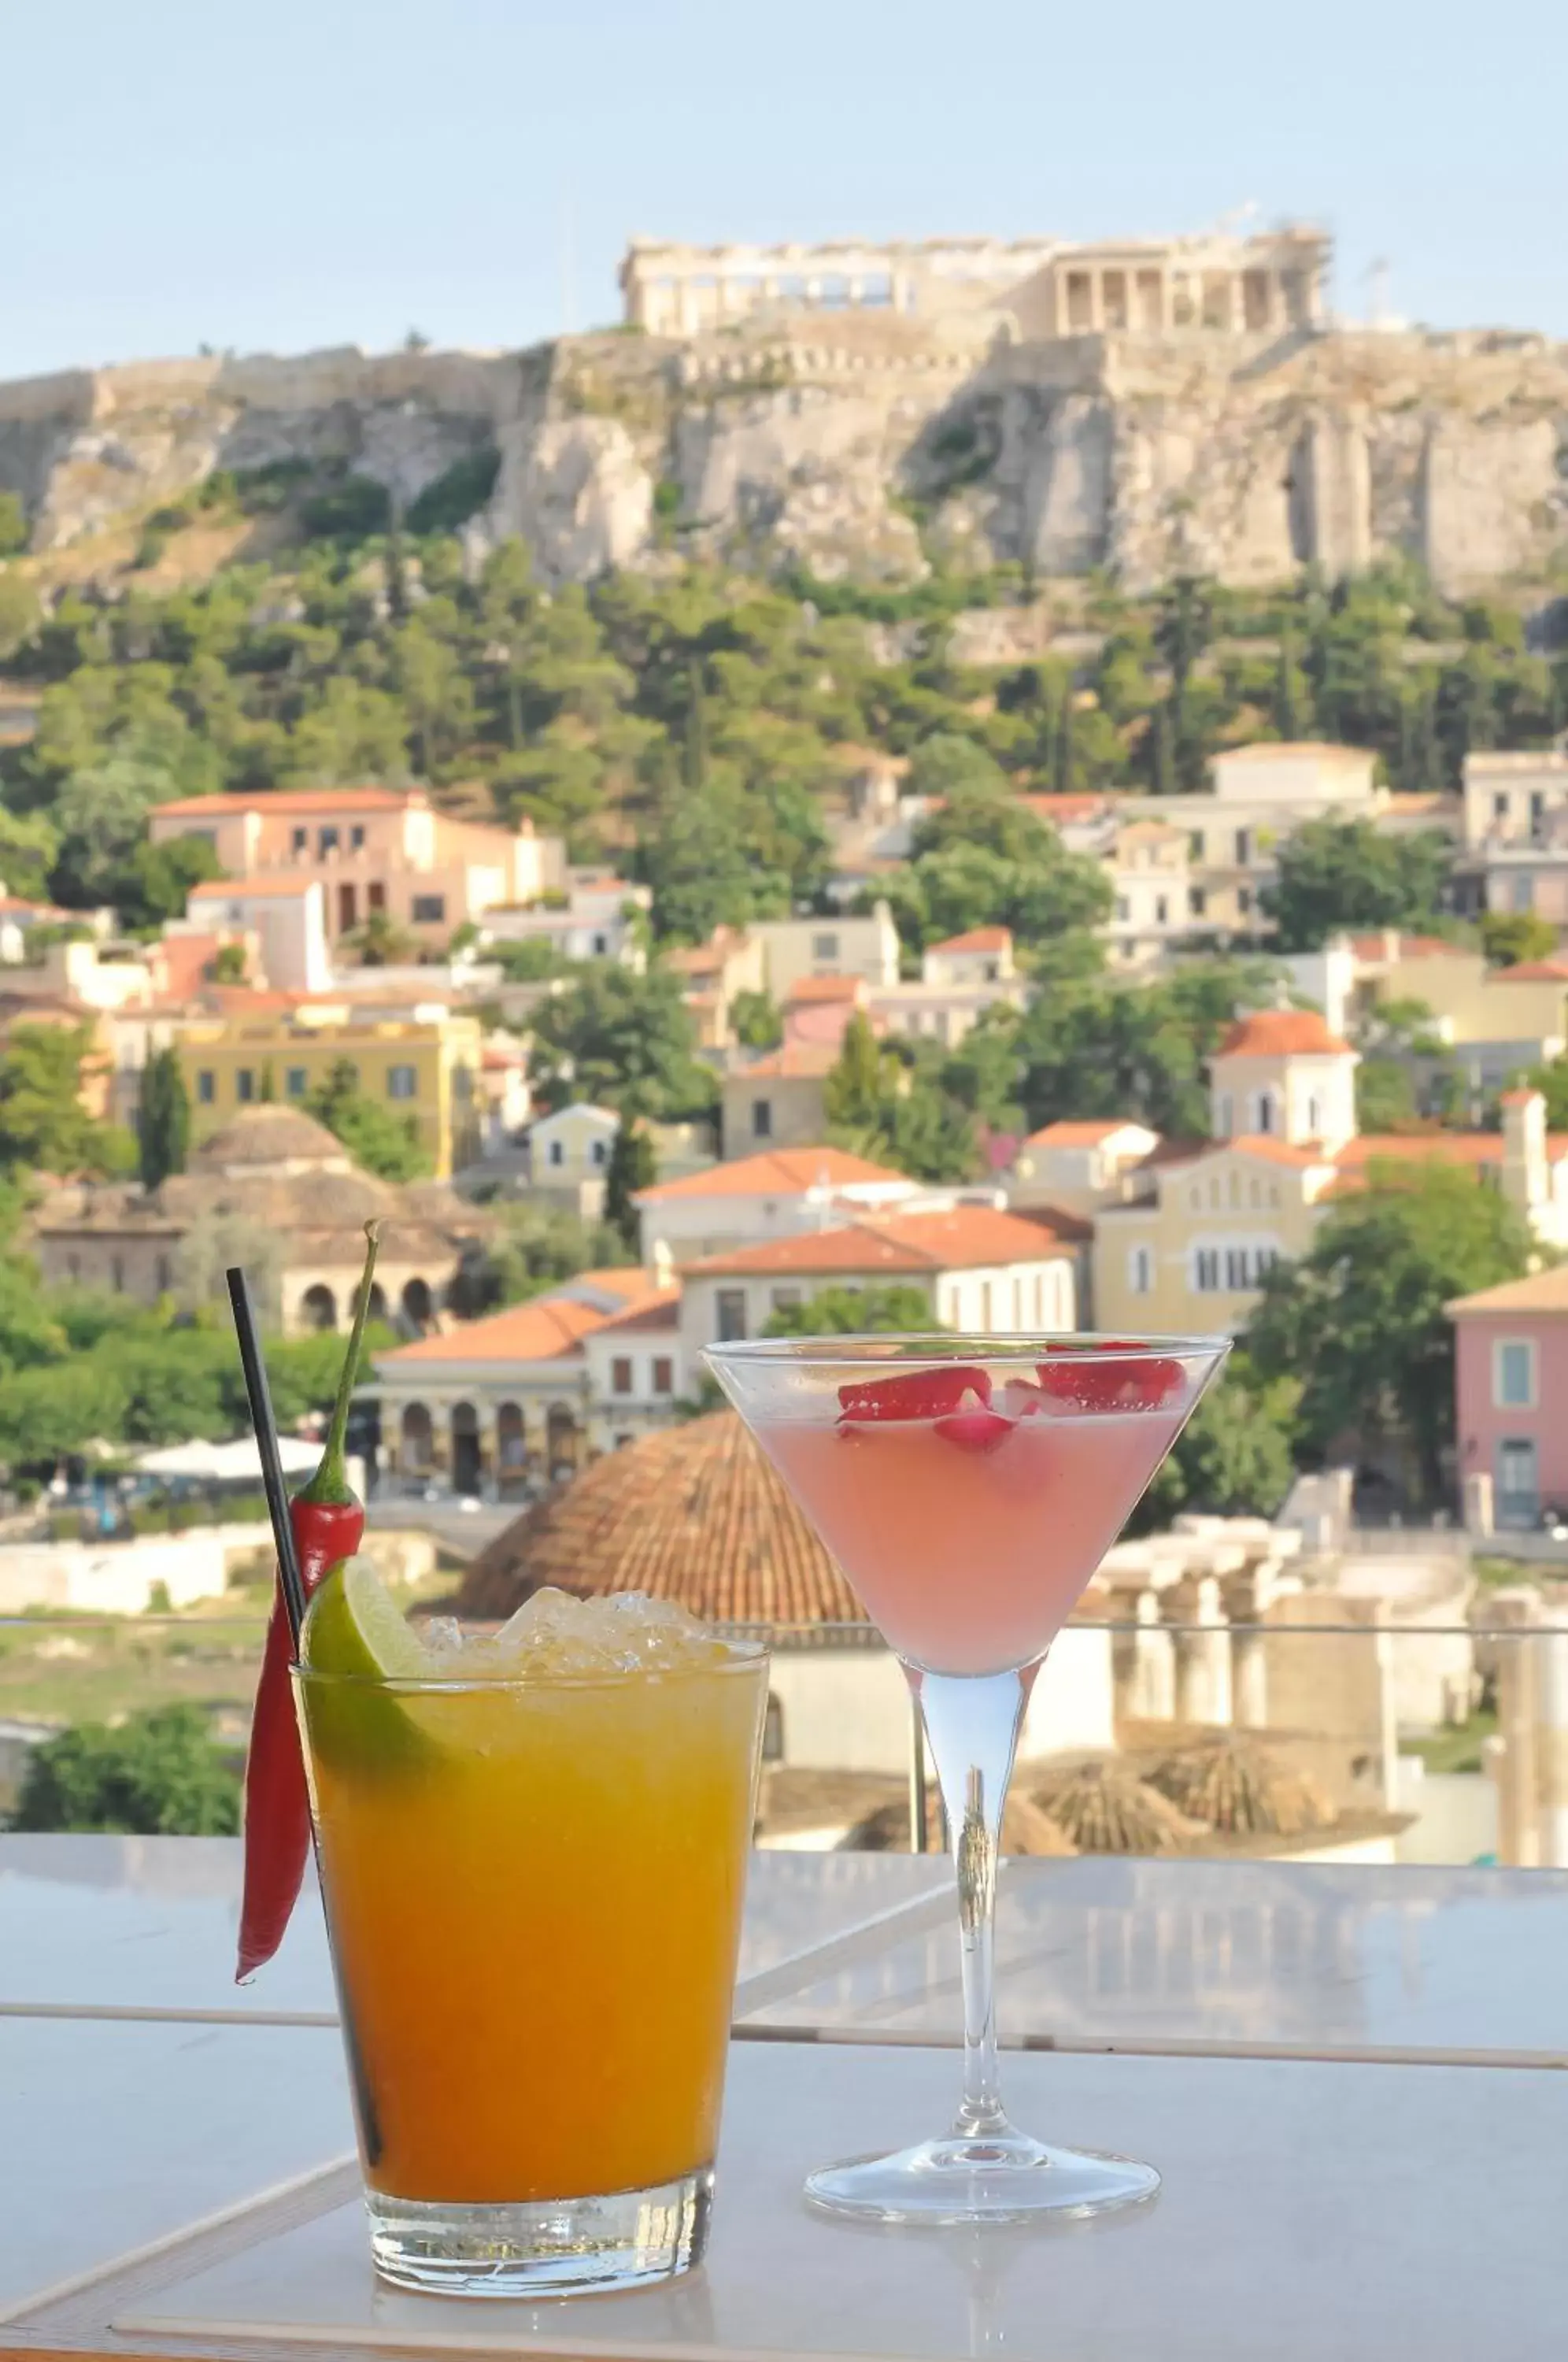 Landmark view in A for Athens